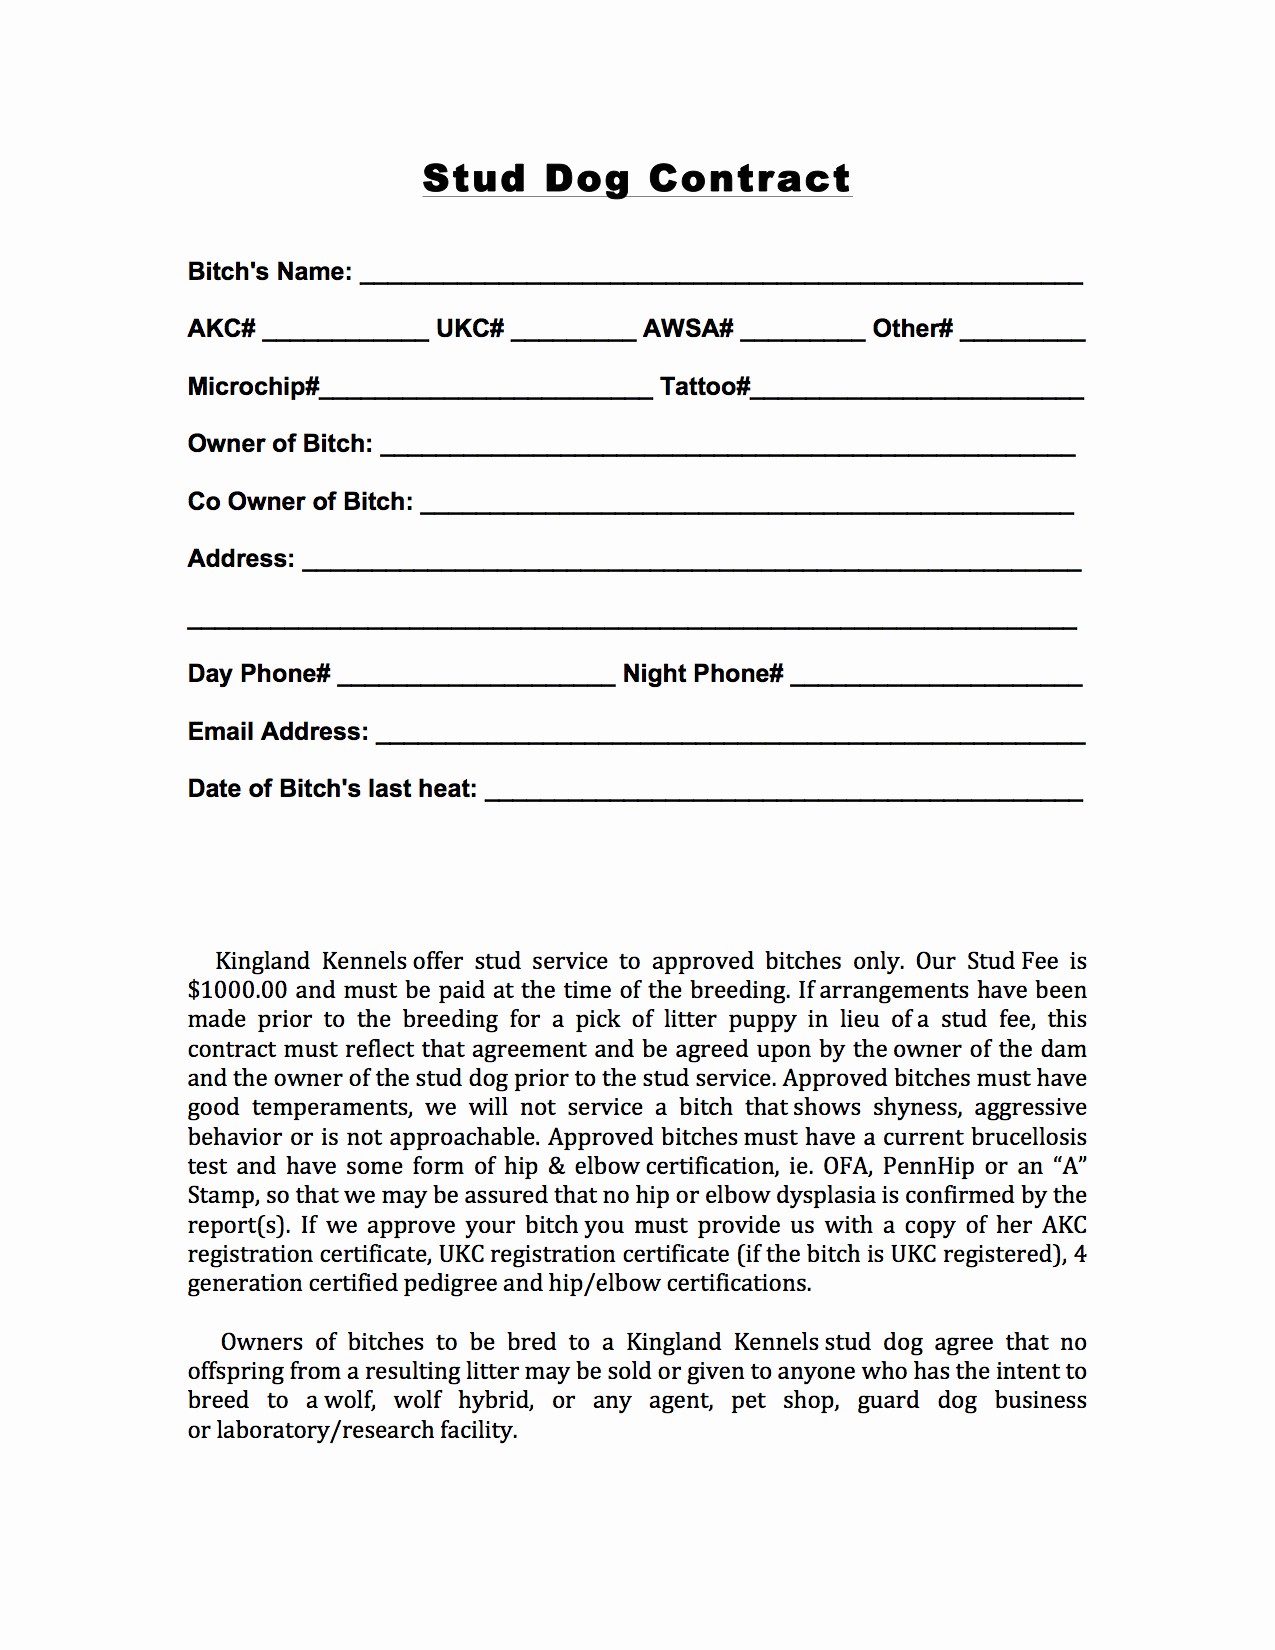 Stud Service Contract Template Awesome Dog Breeding Document